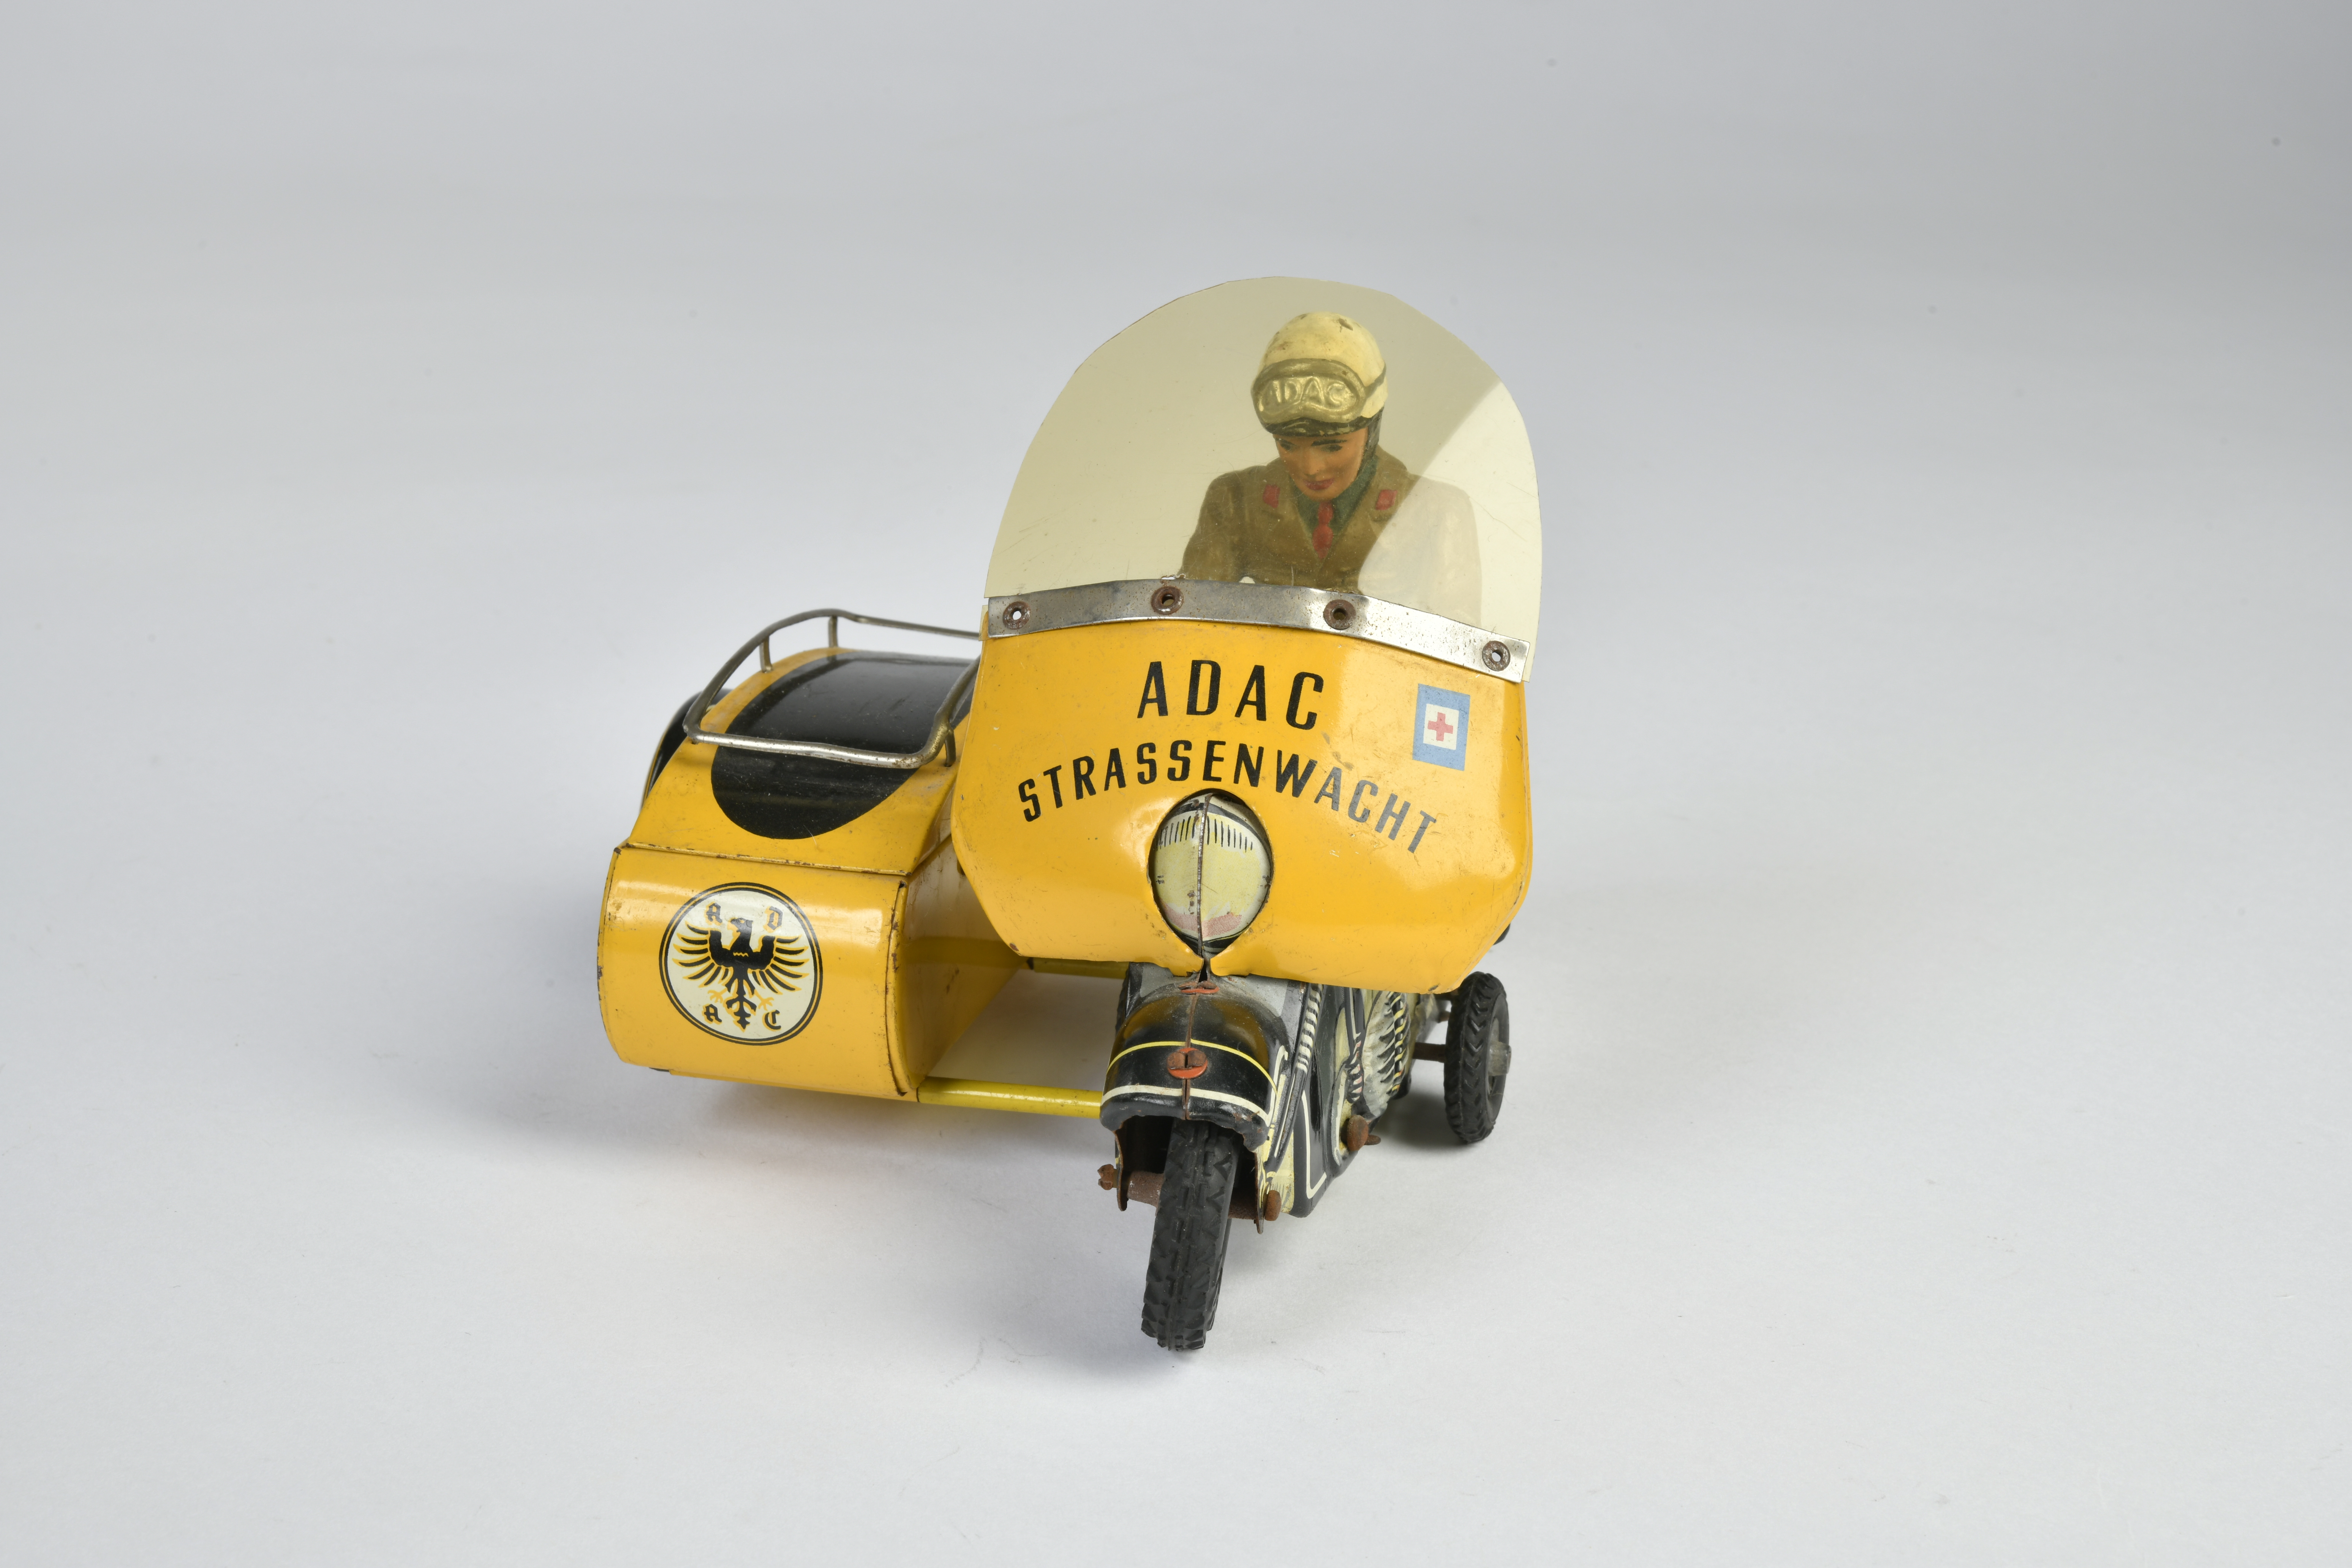 Göso, ADAC Straßenwacht motorcycle with sidecar, W.-Germany, 19 cm, tin, friction ok, paint d., C - Image 2 of 2